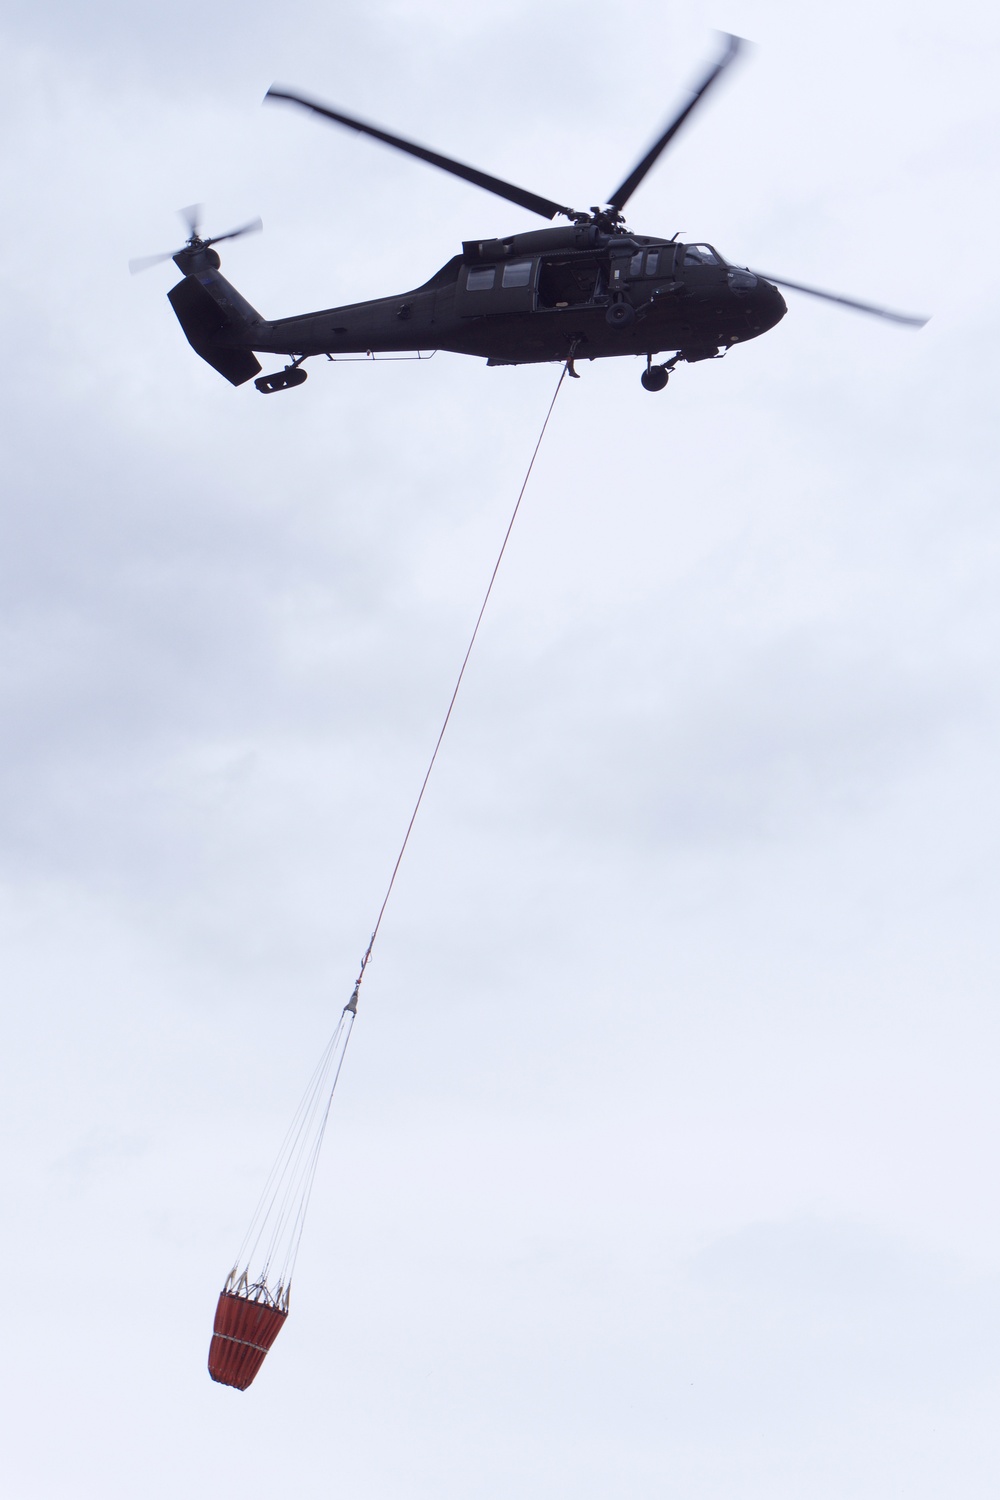 1-207th trains in Bambi bucket, refueling operations